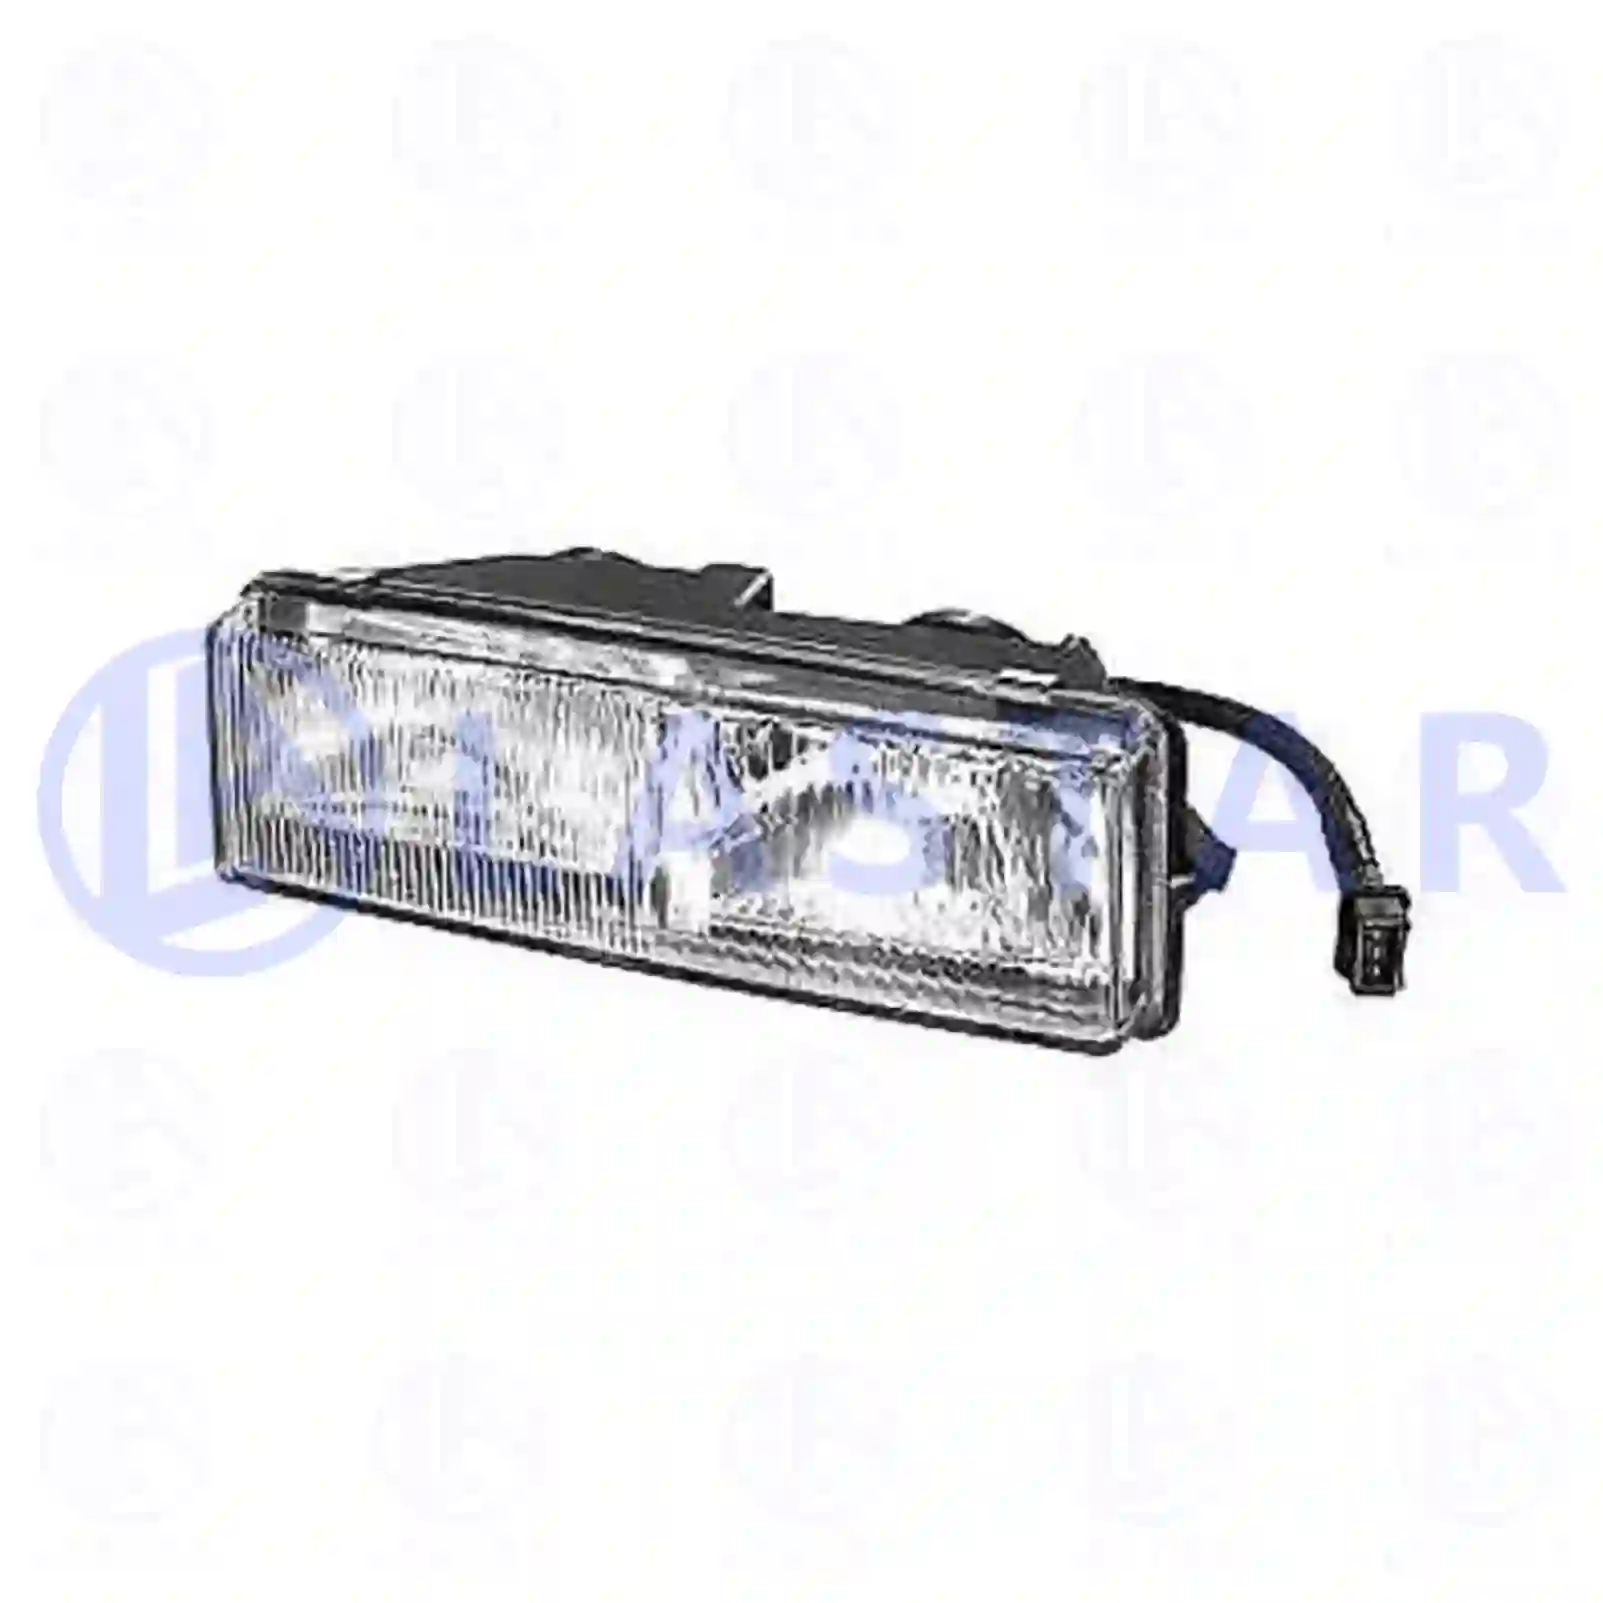 Auxiliary lamp, right, 77710837, 1328861, ZG20260-0008 ||  77710837 Lastar Spare Part | Truck Spare Parts, Auotomotive Spare Parts Auxiliary lamp, right, 77710837, 1328861, ZG20260-0008 ||  77710837 Lastar Spare Part | Truck Spare Parts, Auotomotive Spare Parts